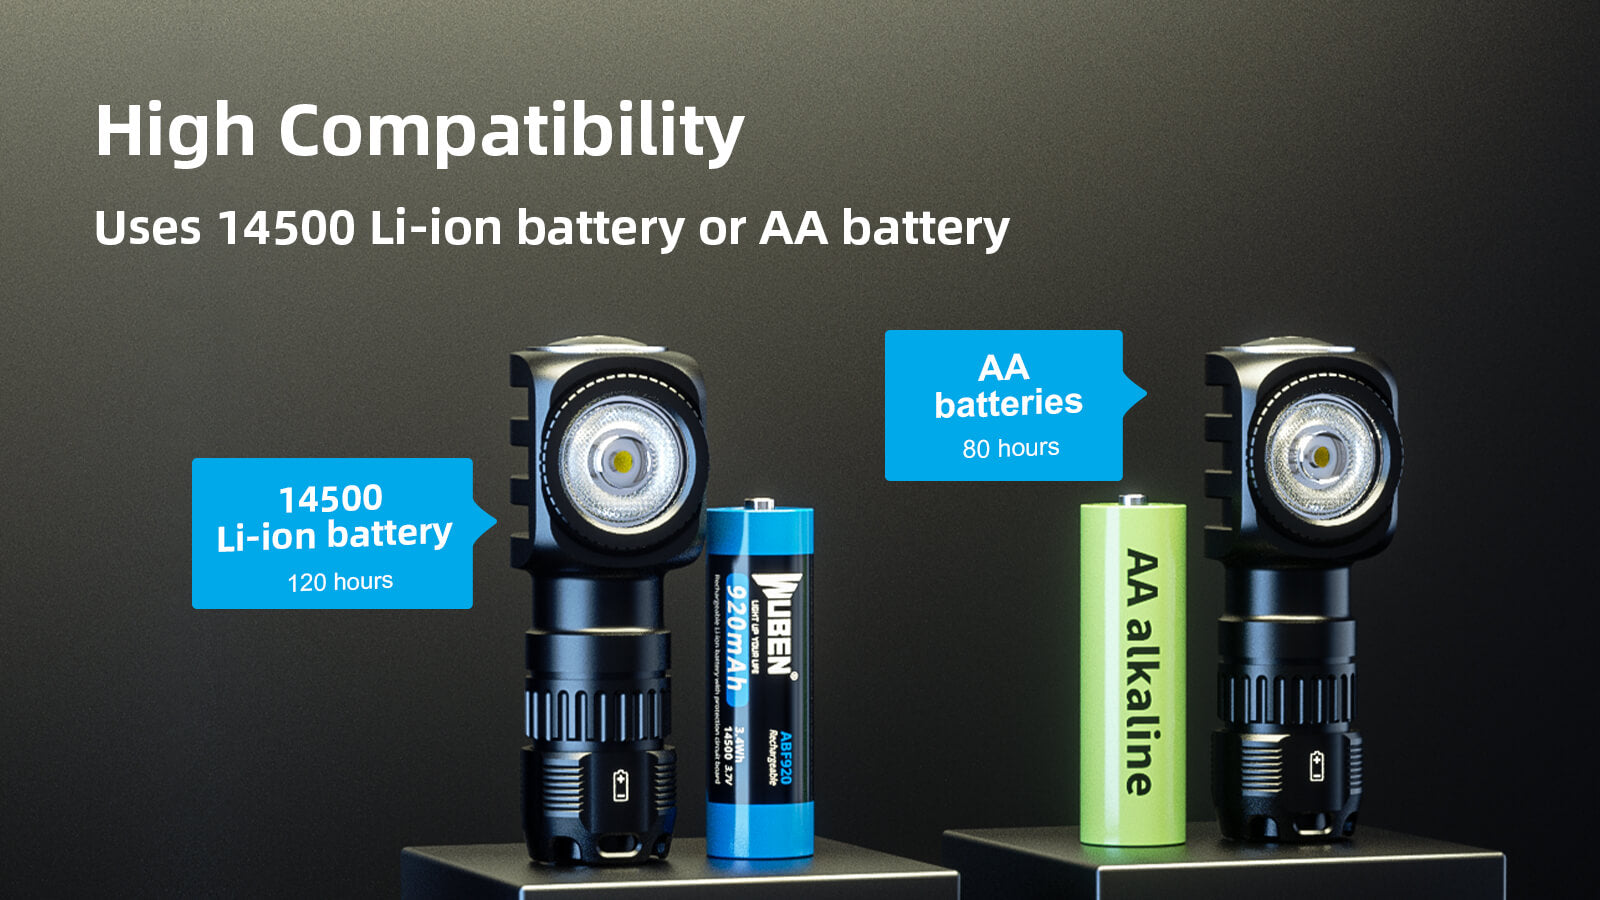 High Compatibility
Uses 14500 Li-ion battery or AA battery